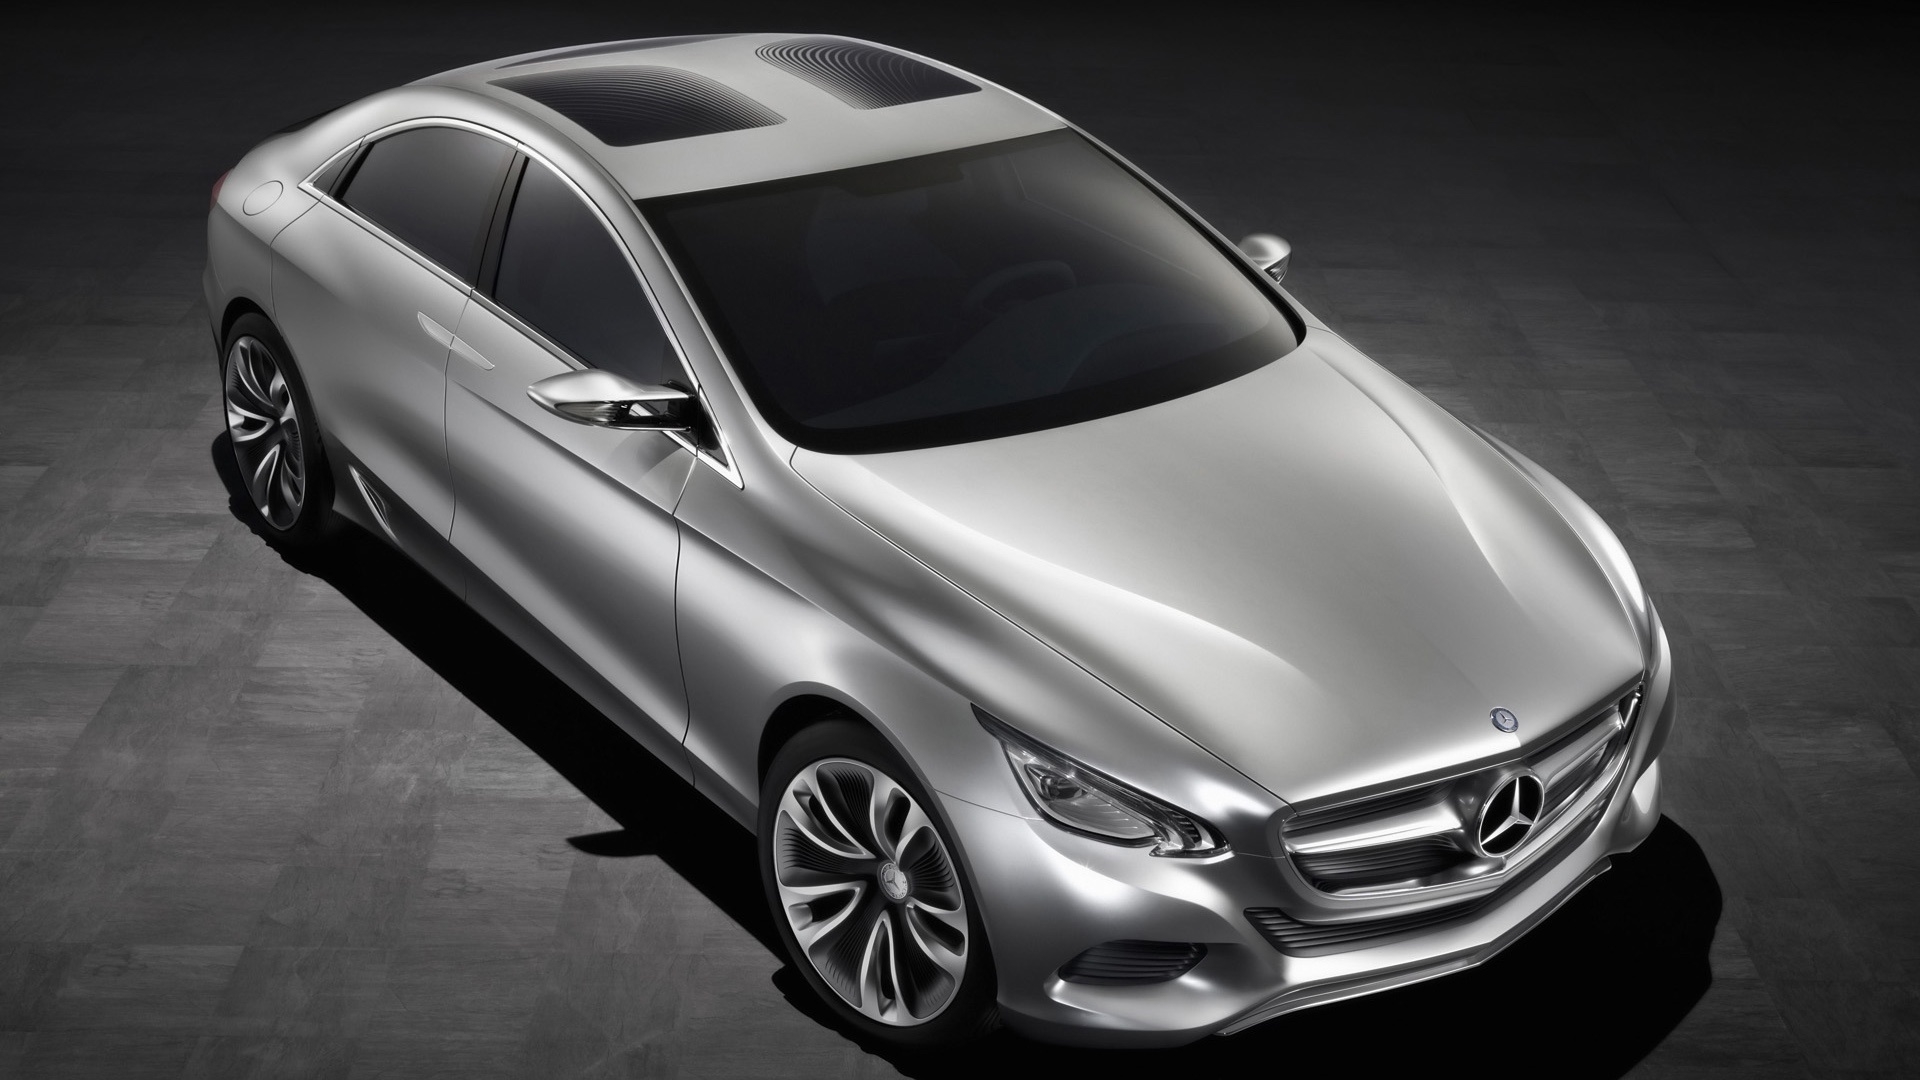 Mercedes-Benz F 800 2010 for 1920 x 1080 HDTV 1080p resolution